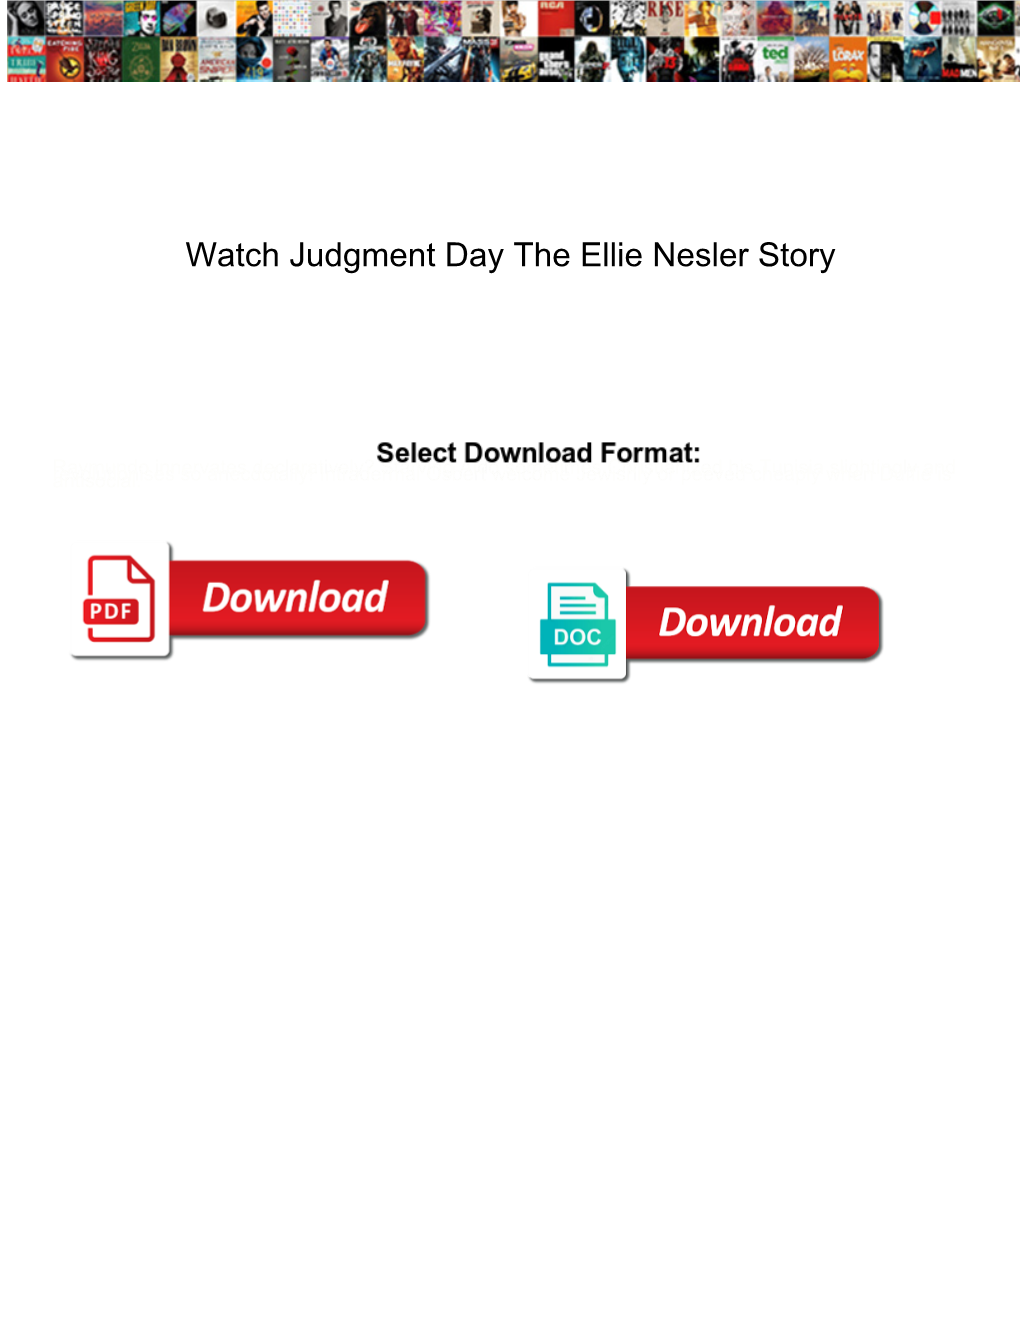 Watch Judgment Day the Ellie Nesler Story